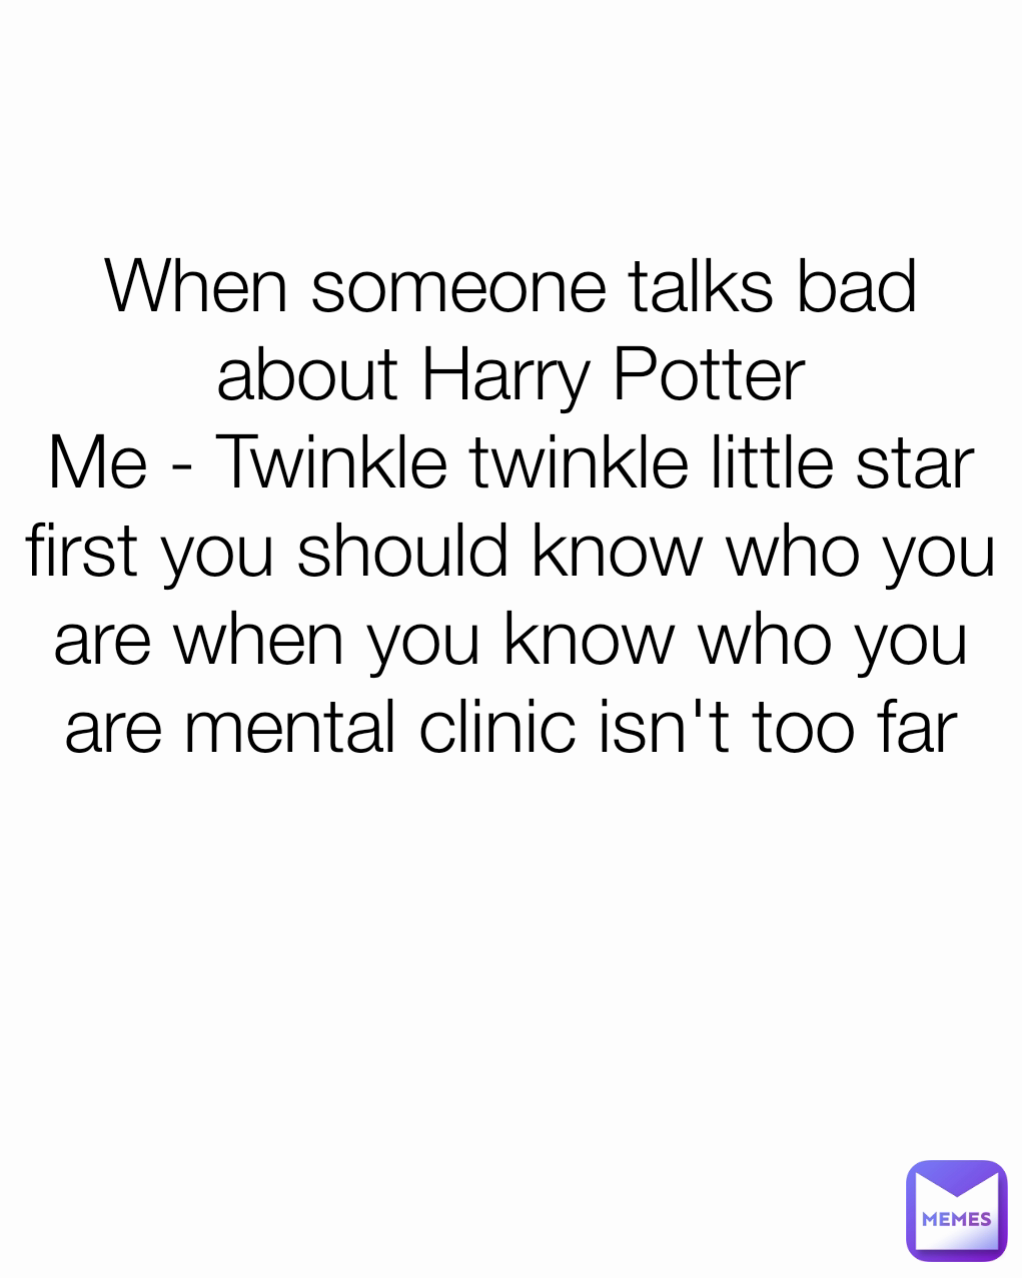 When someone talks bad about Harry Potter
Me - Twinkle twinkle little star first you should know who you are when you know who you are mental clinic isn't too far